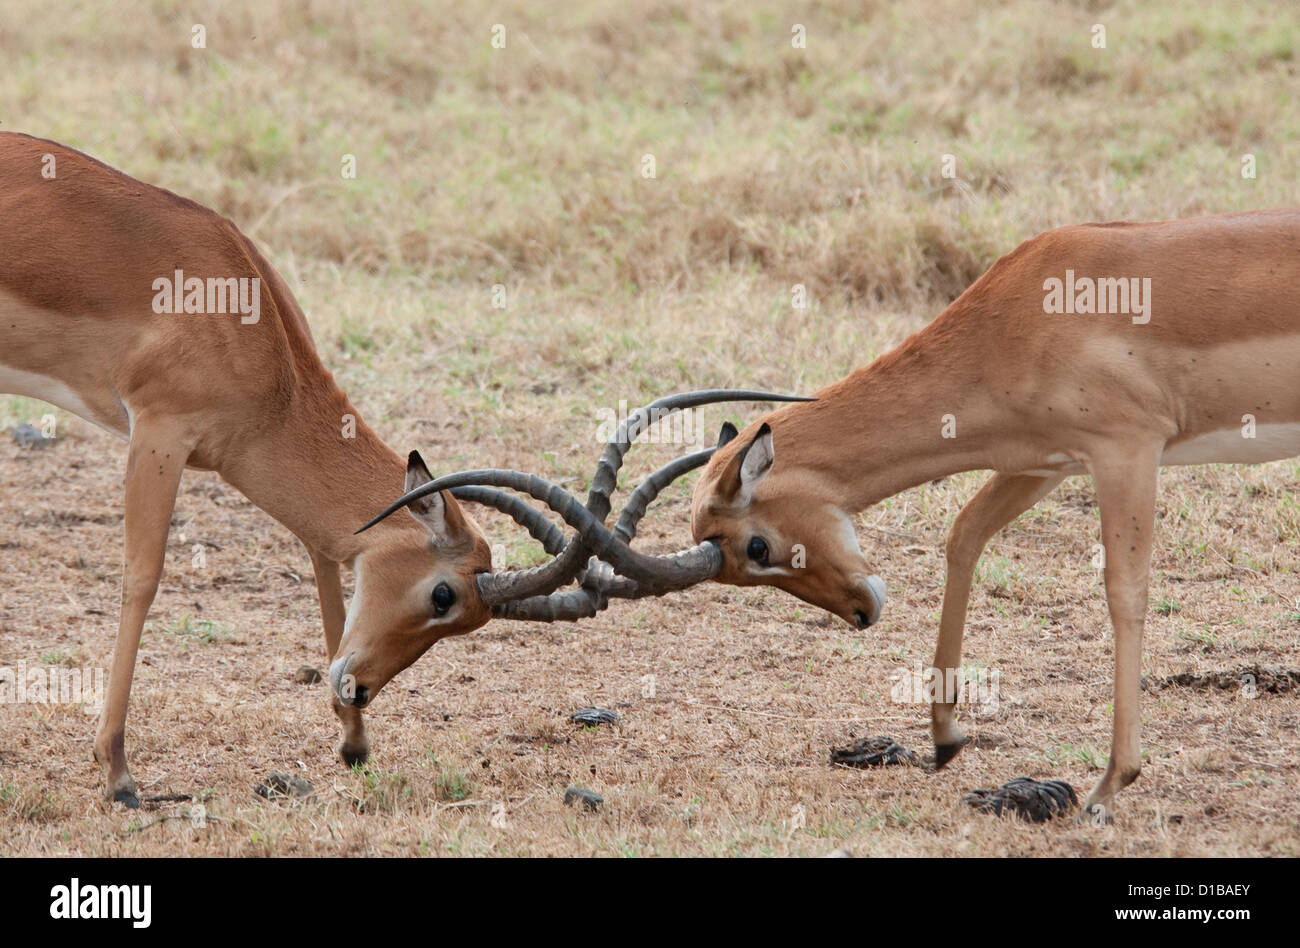 Two male impalas sparring Stock Photo